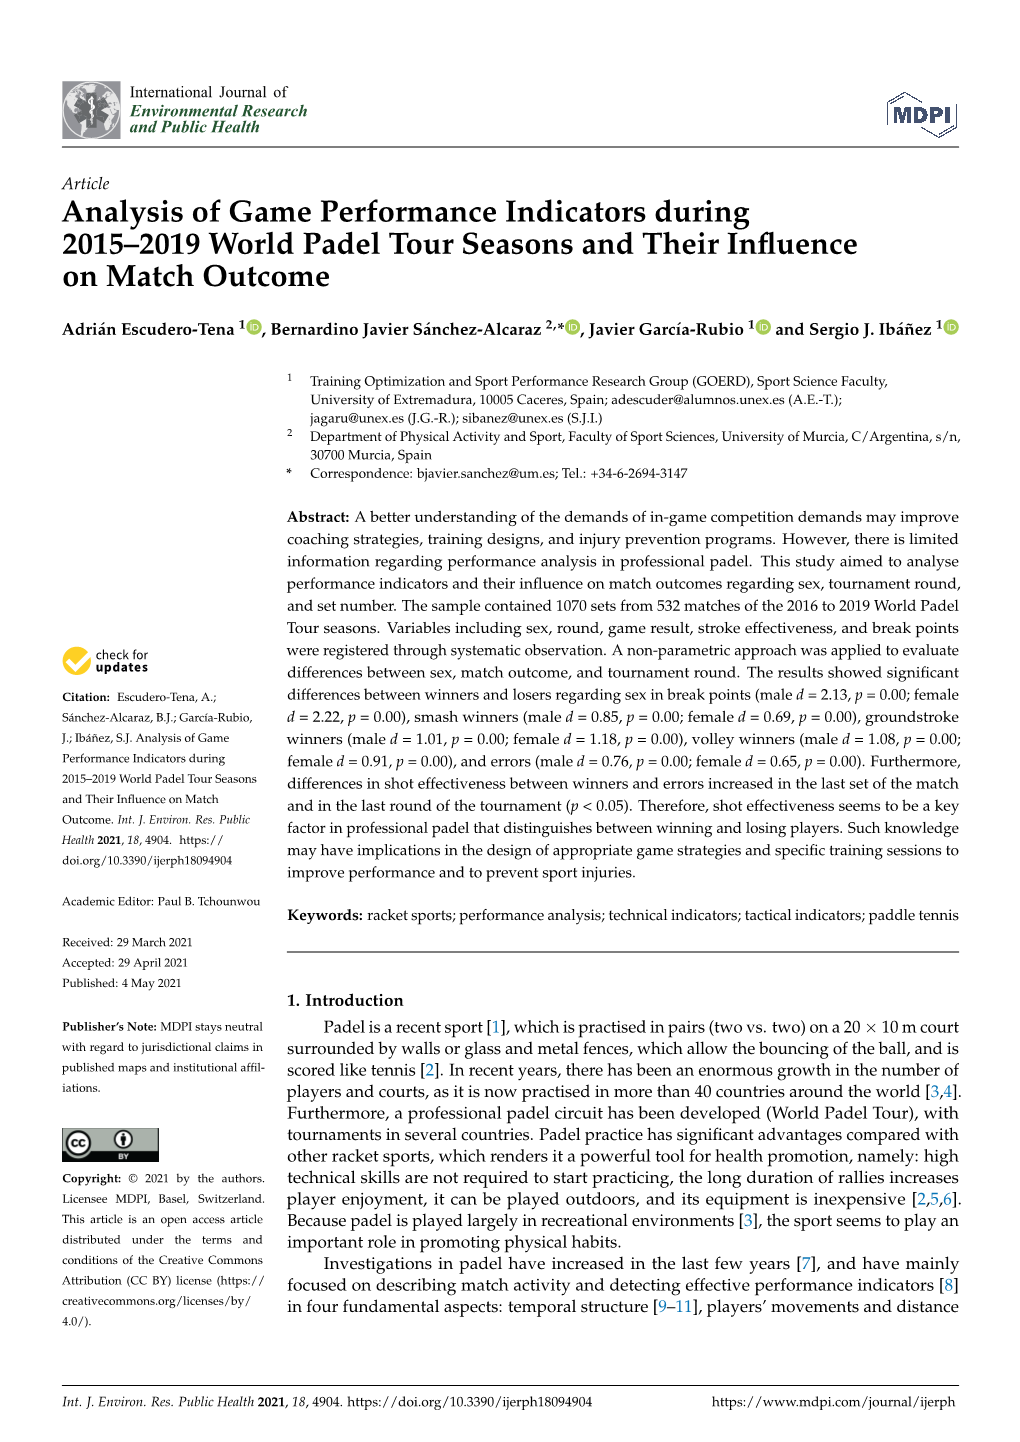 Analysis of Game Performance Indicators During 2015–2019 World Padel Tour Seasons and Their Inﬂuence on Match Outcome